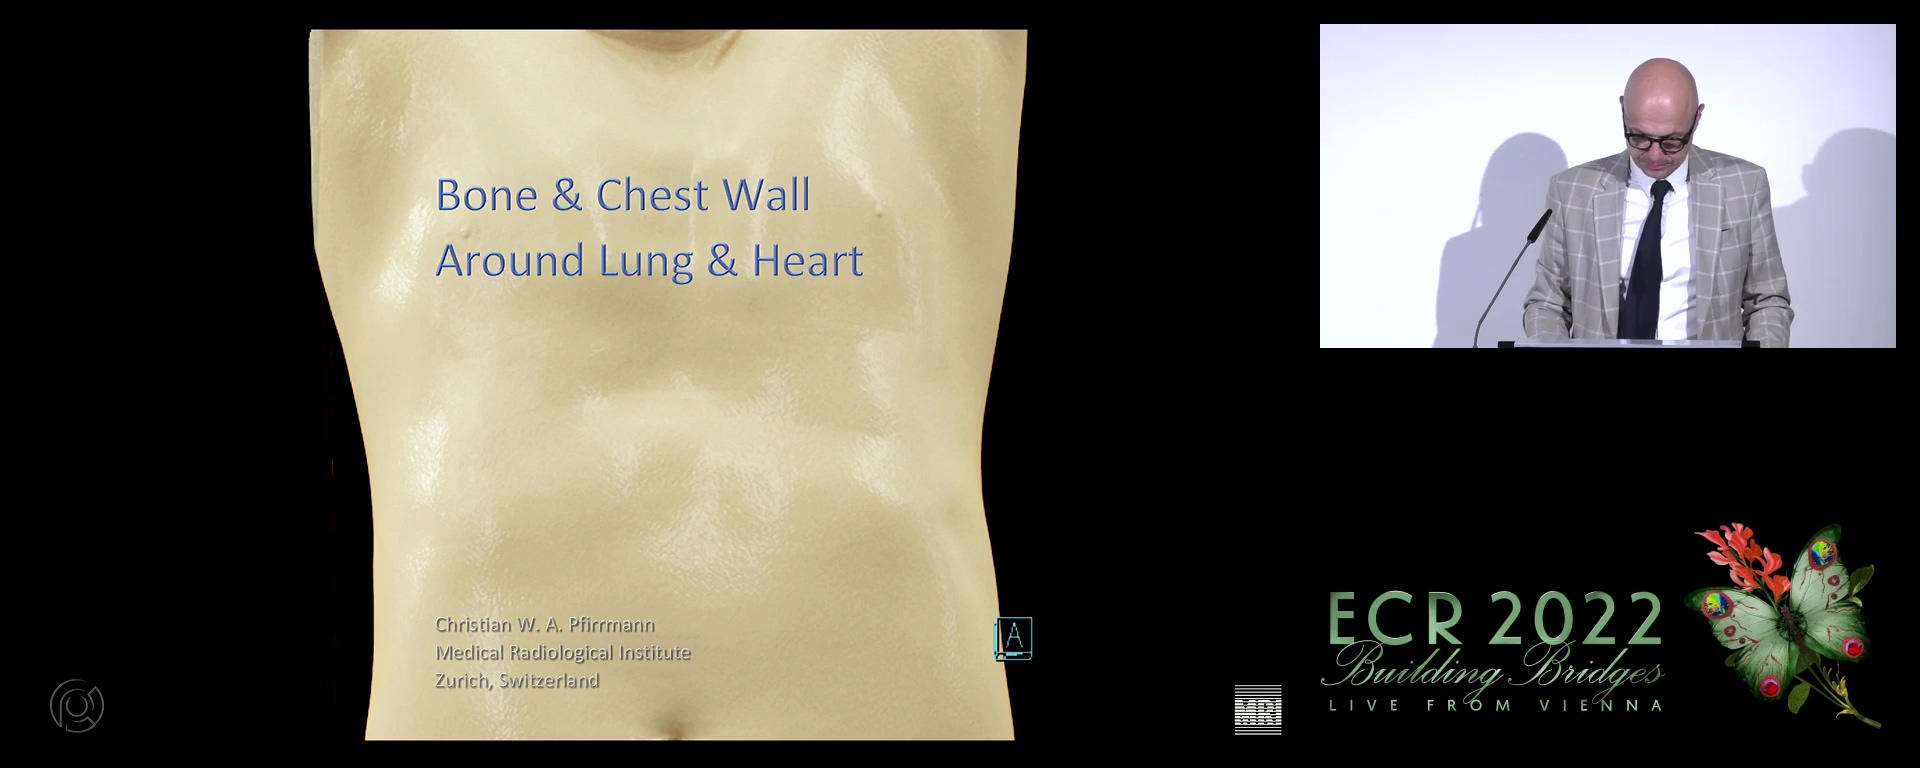 Bones and the chest wall